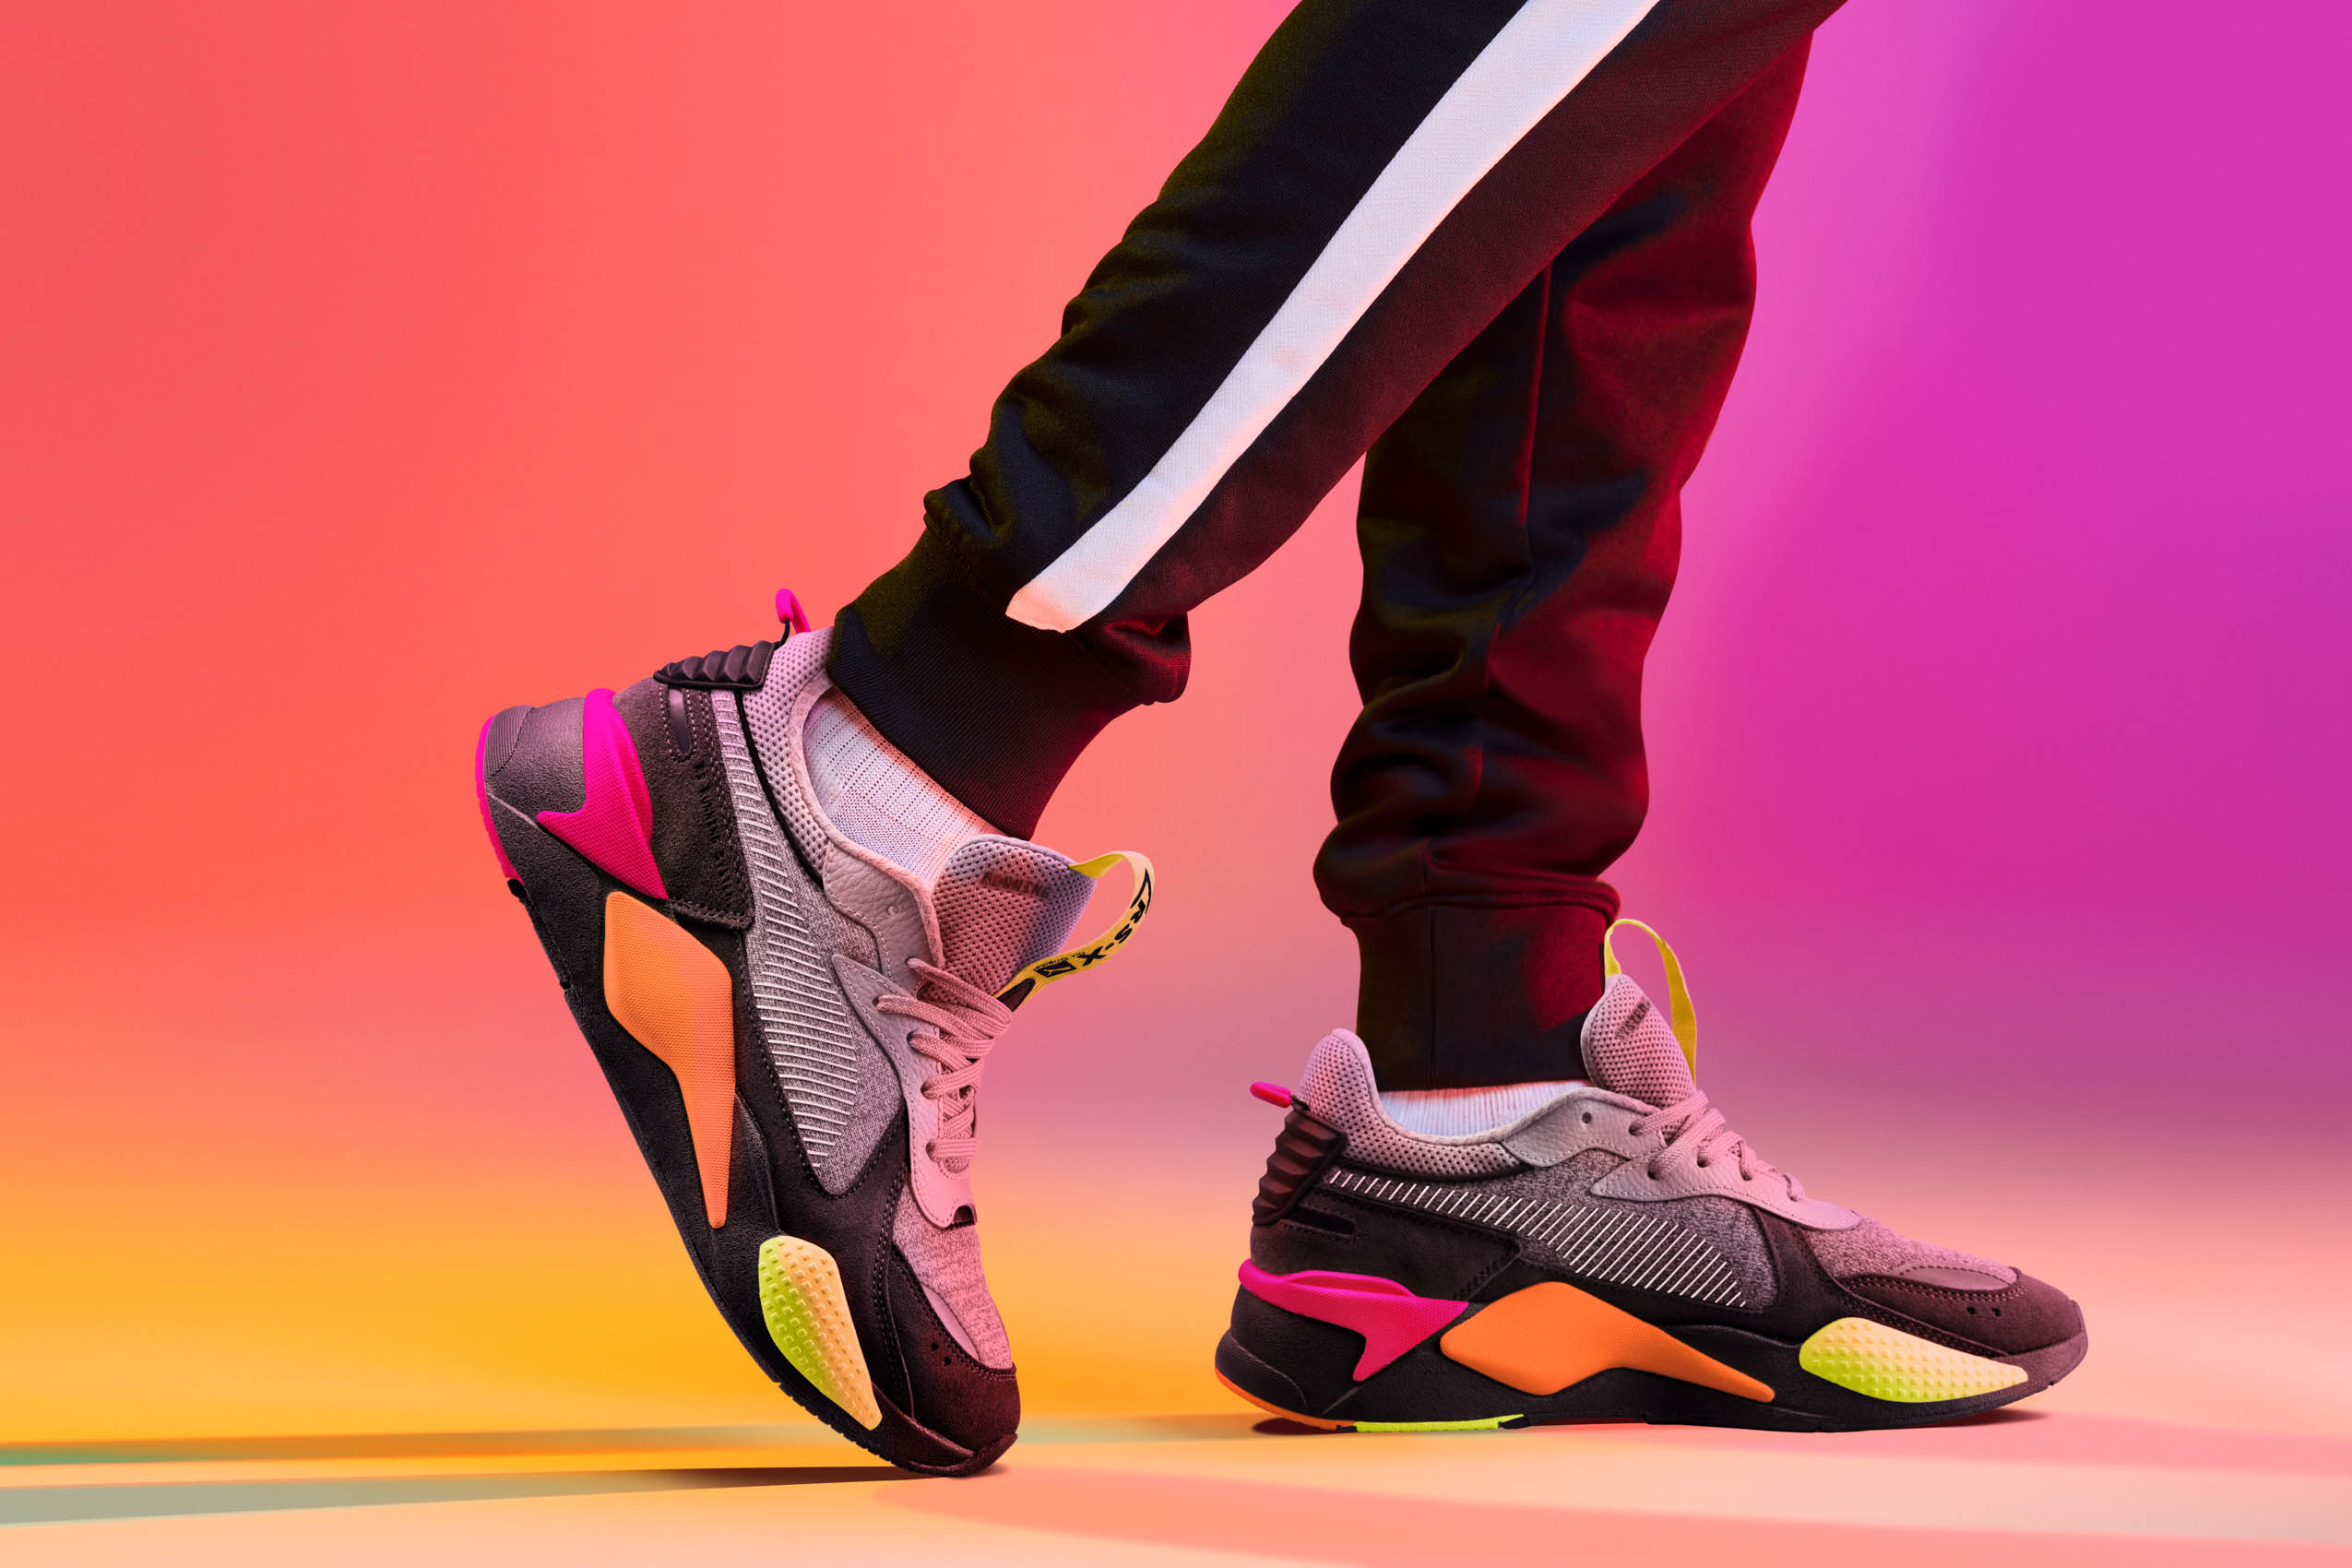 Close up images of R&B Artist Ye Ali wearing the Puma RS-X for Foot Locker